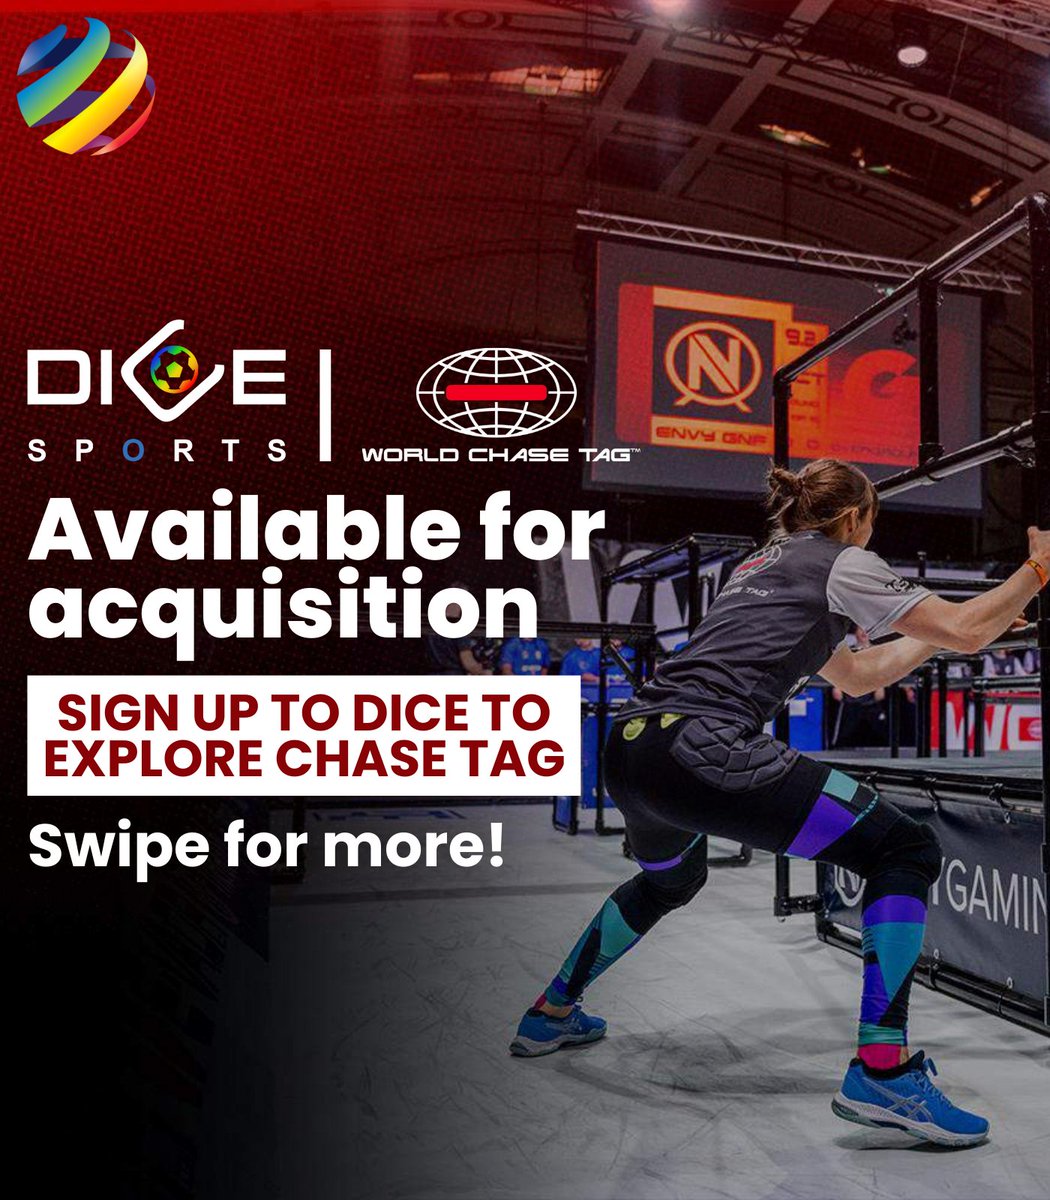 Tag, you're it! 🏃🏃 

Explore & acquire @worldchasetag, an adrenaline-fueled adventure where childhood game meets extreme sport: zaap.bio/dicekonnectdig… 

#worldchasetag #chasetag #tag #sports #extremesports #broadcast #ott #vod #streaming #dicekonnectdigital